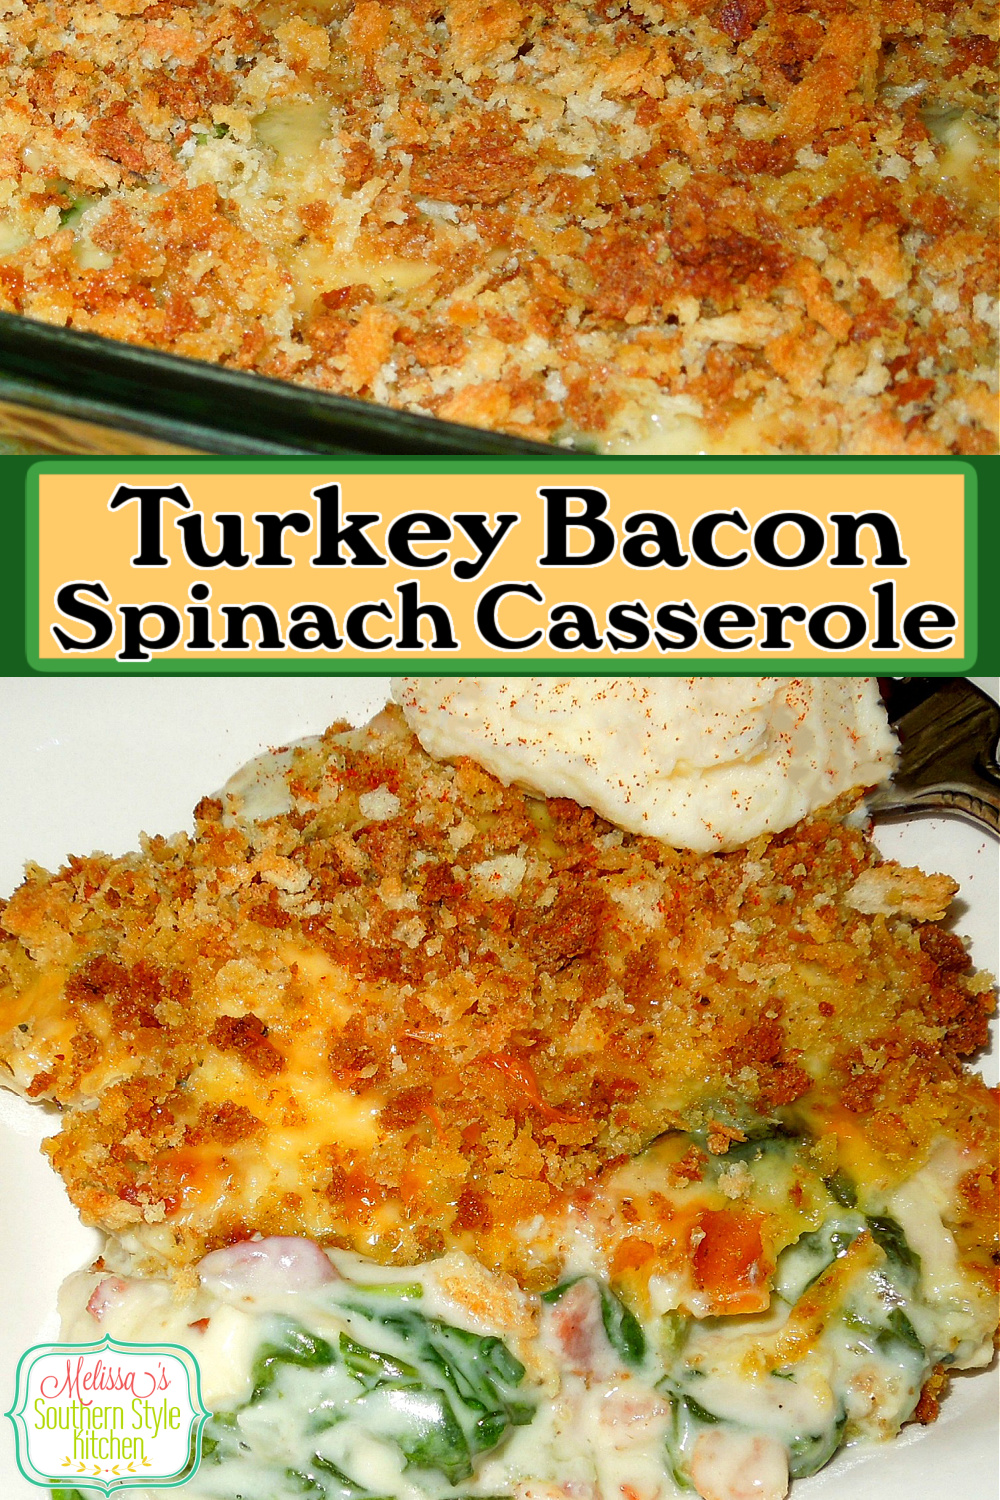 This Turkey Bacon Spinach Casserole is a delicious way to transform holiday leftovers. #turkey #turkeyrecipes #turkeycasserole #casseroles #casserolerecipes #bacon #turkeyanddressing #leftoverturkeyrecipes #southernrecipes #goudacheese #melissassouthernstylekitchen via @melissasssk